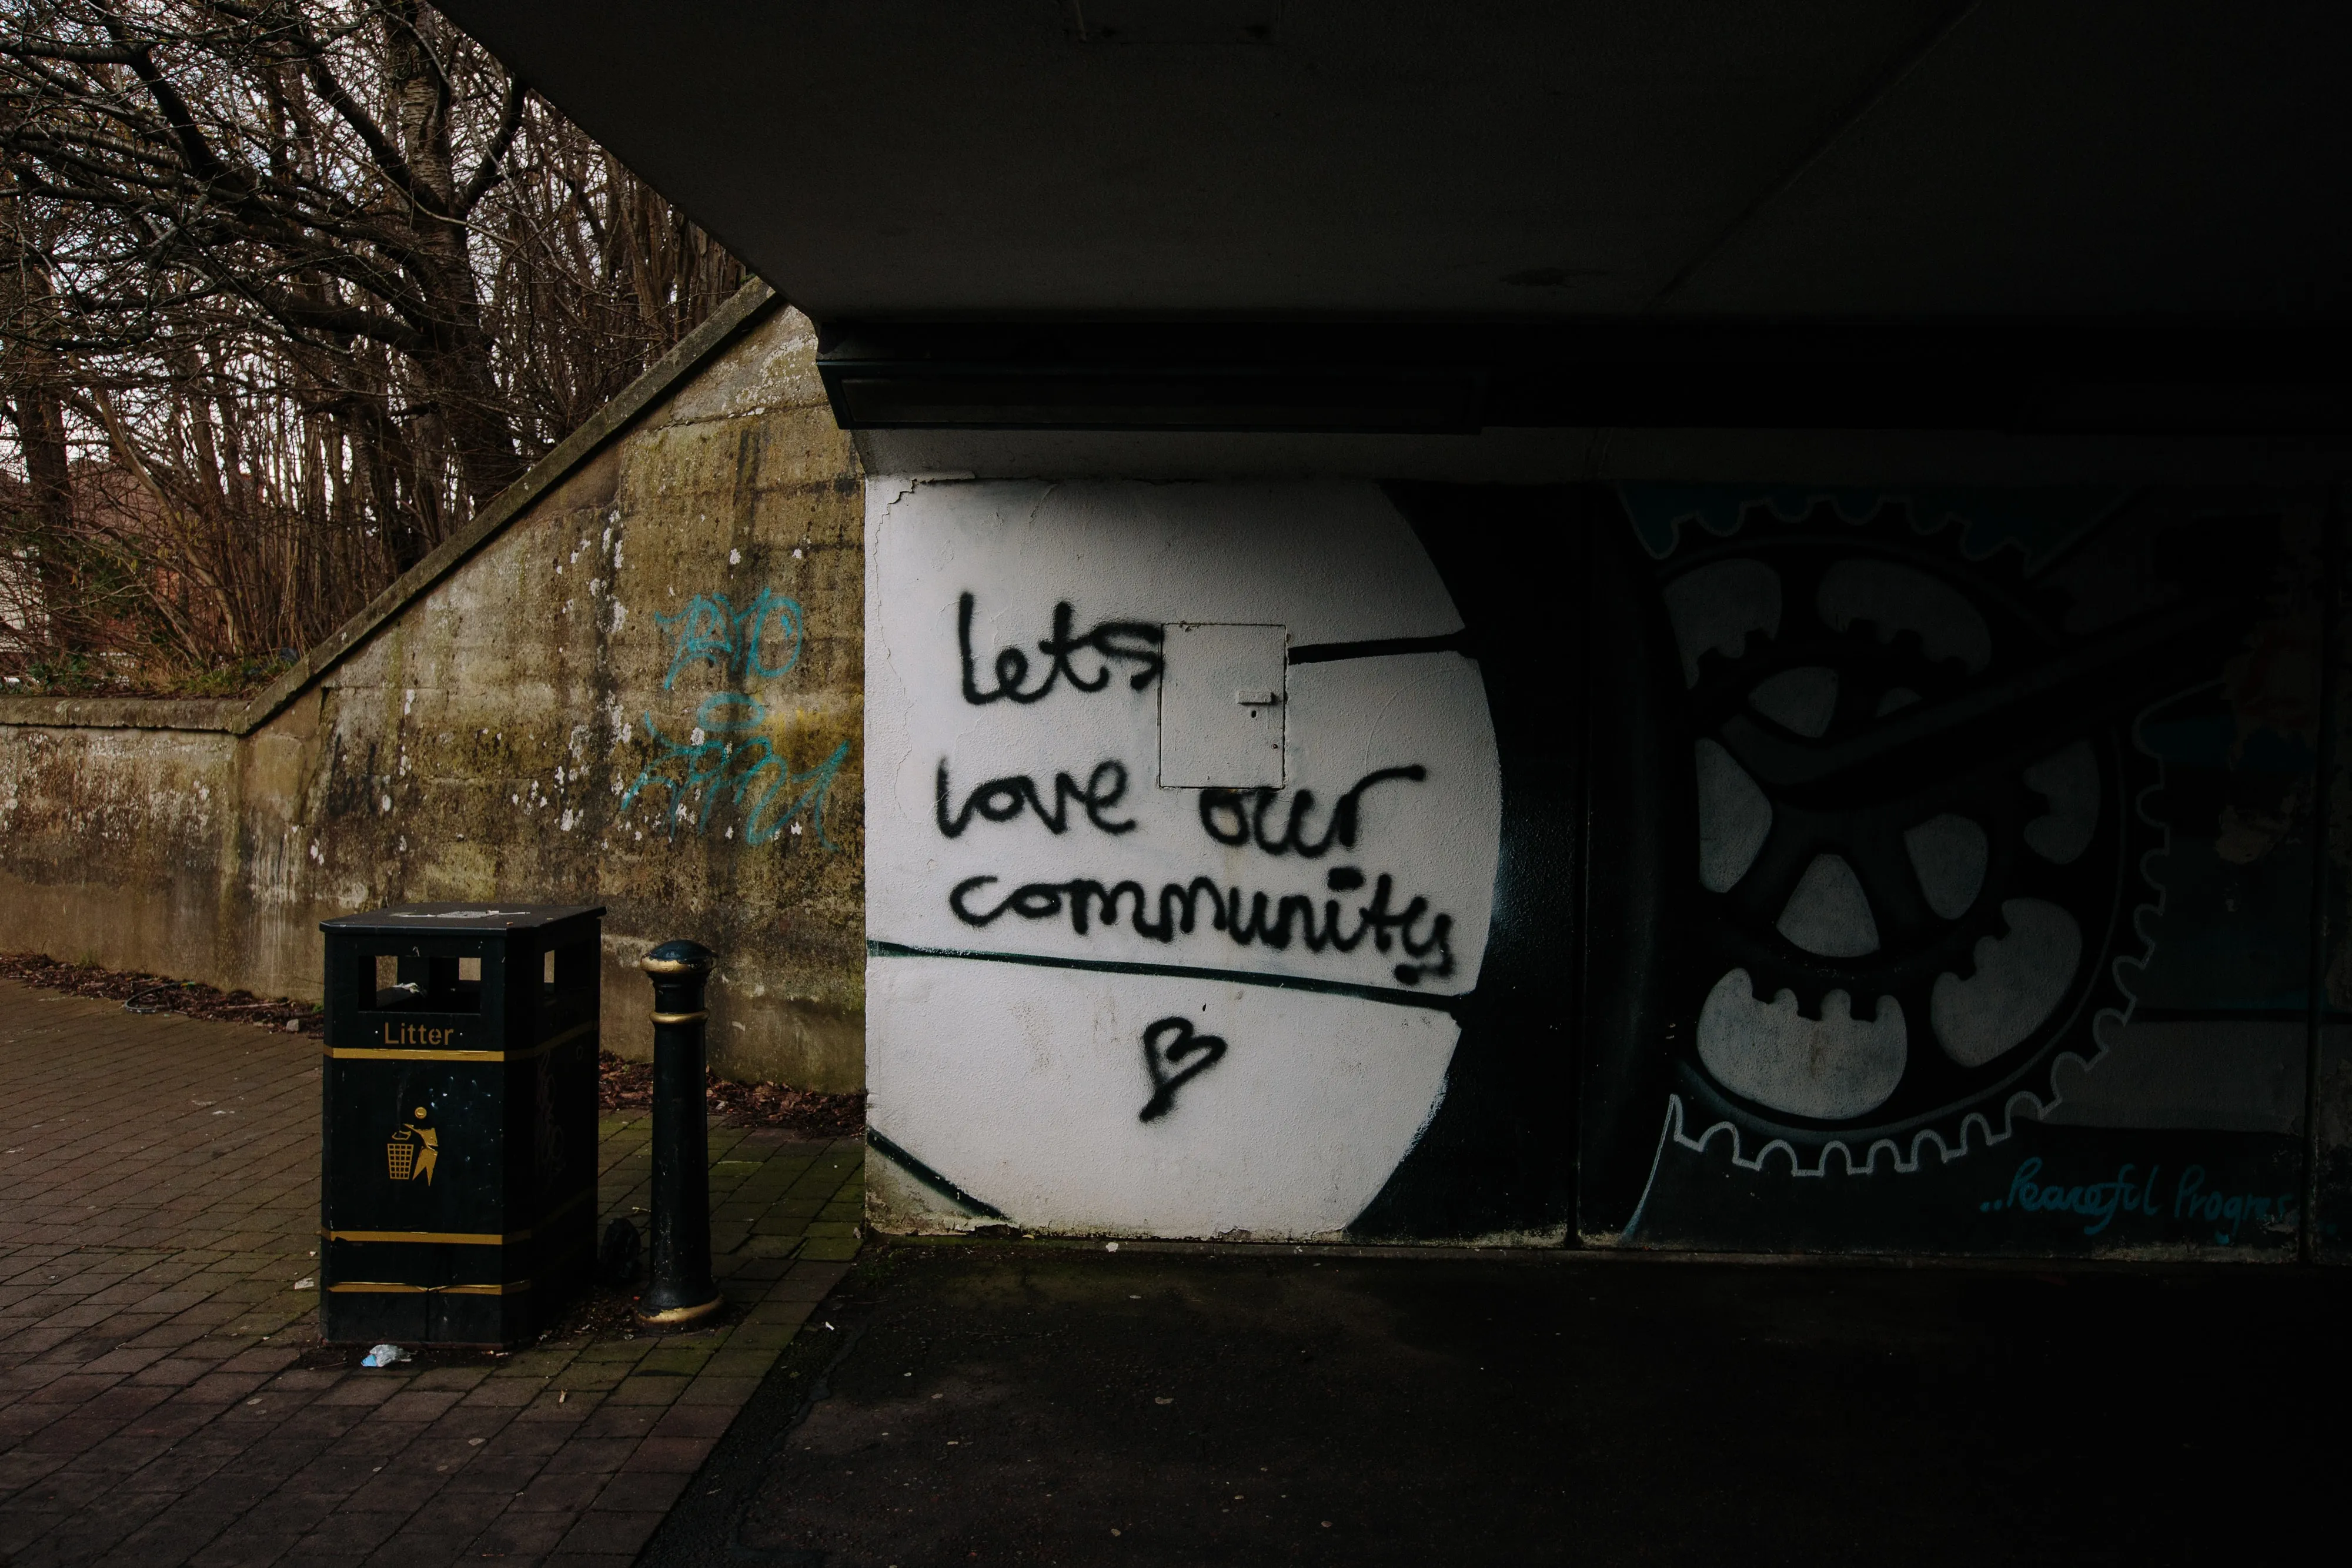 Photo Credit: Mike Erskine for Unsplash.com
Image of a pedestrian underpass found in a large English park in London. Graffiti in black on a white background reads: We Love Our Community (heart symbol). Ol the left is a public rubbish bin with the outward spread of concrete forming an angled entrance behind the bin. 